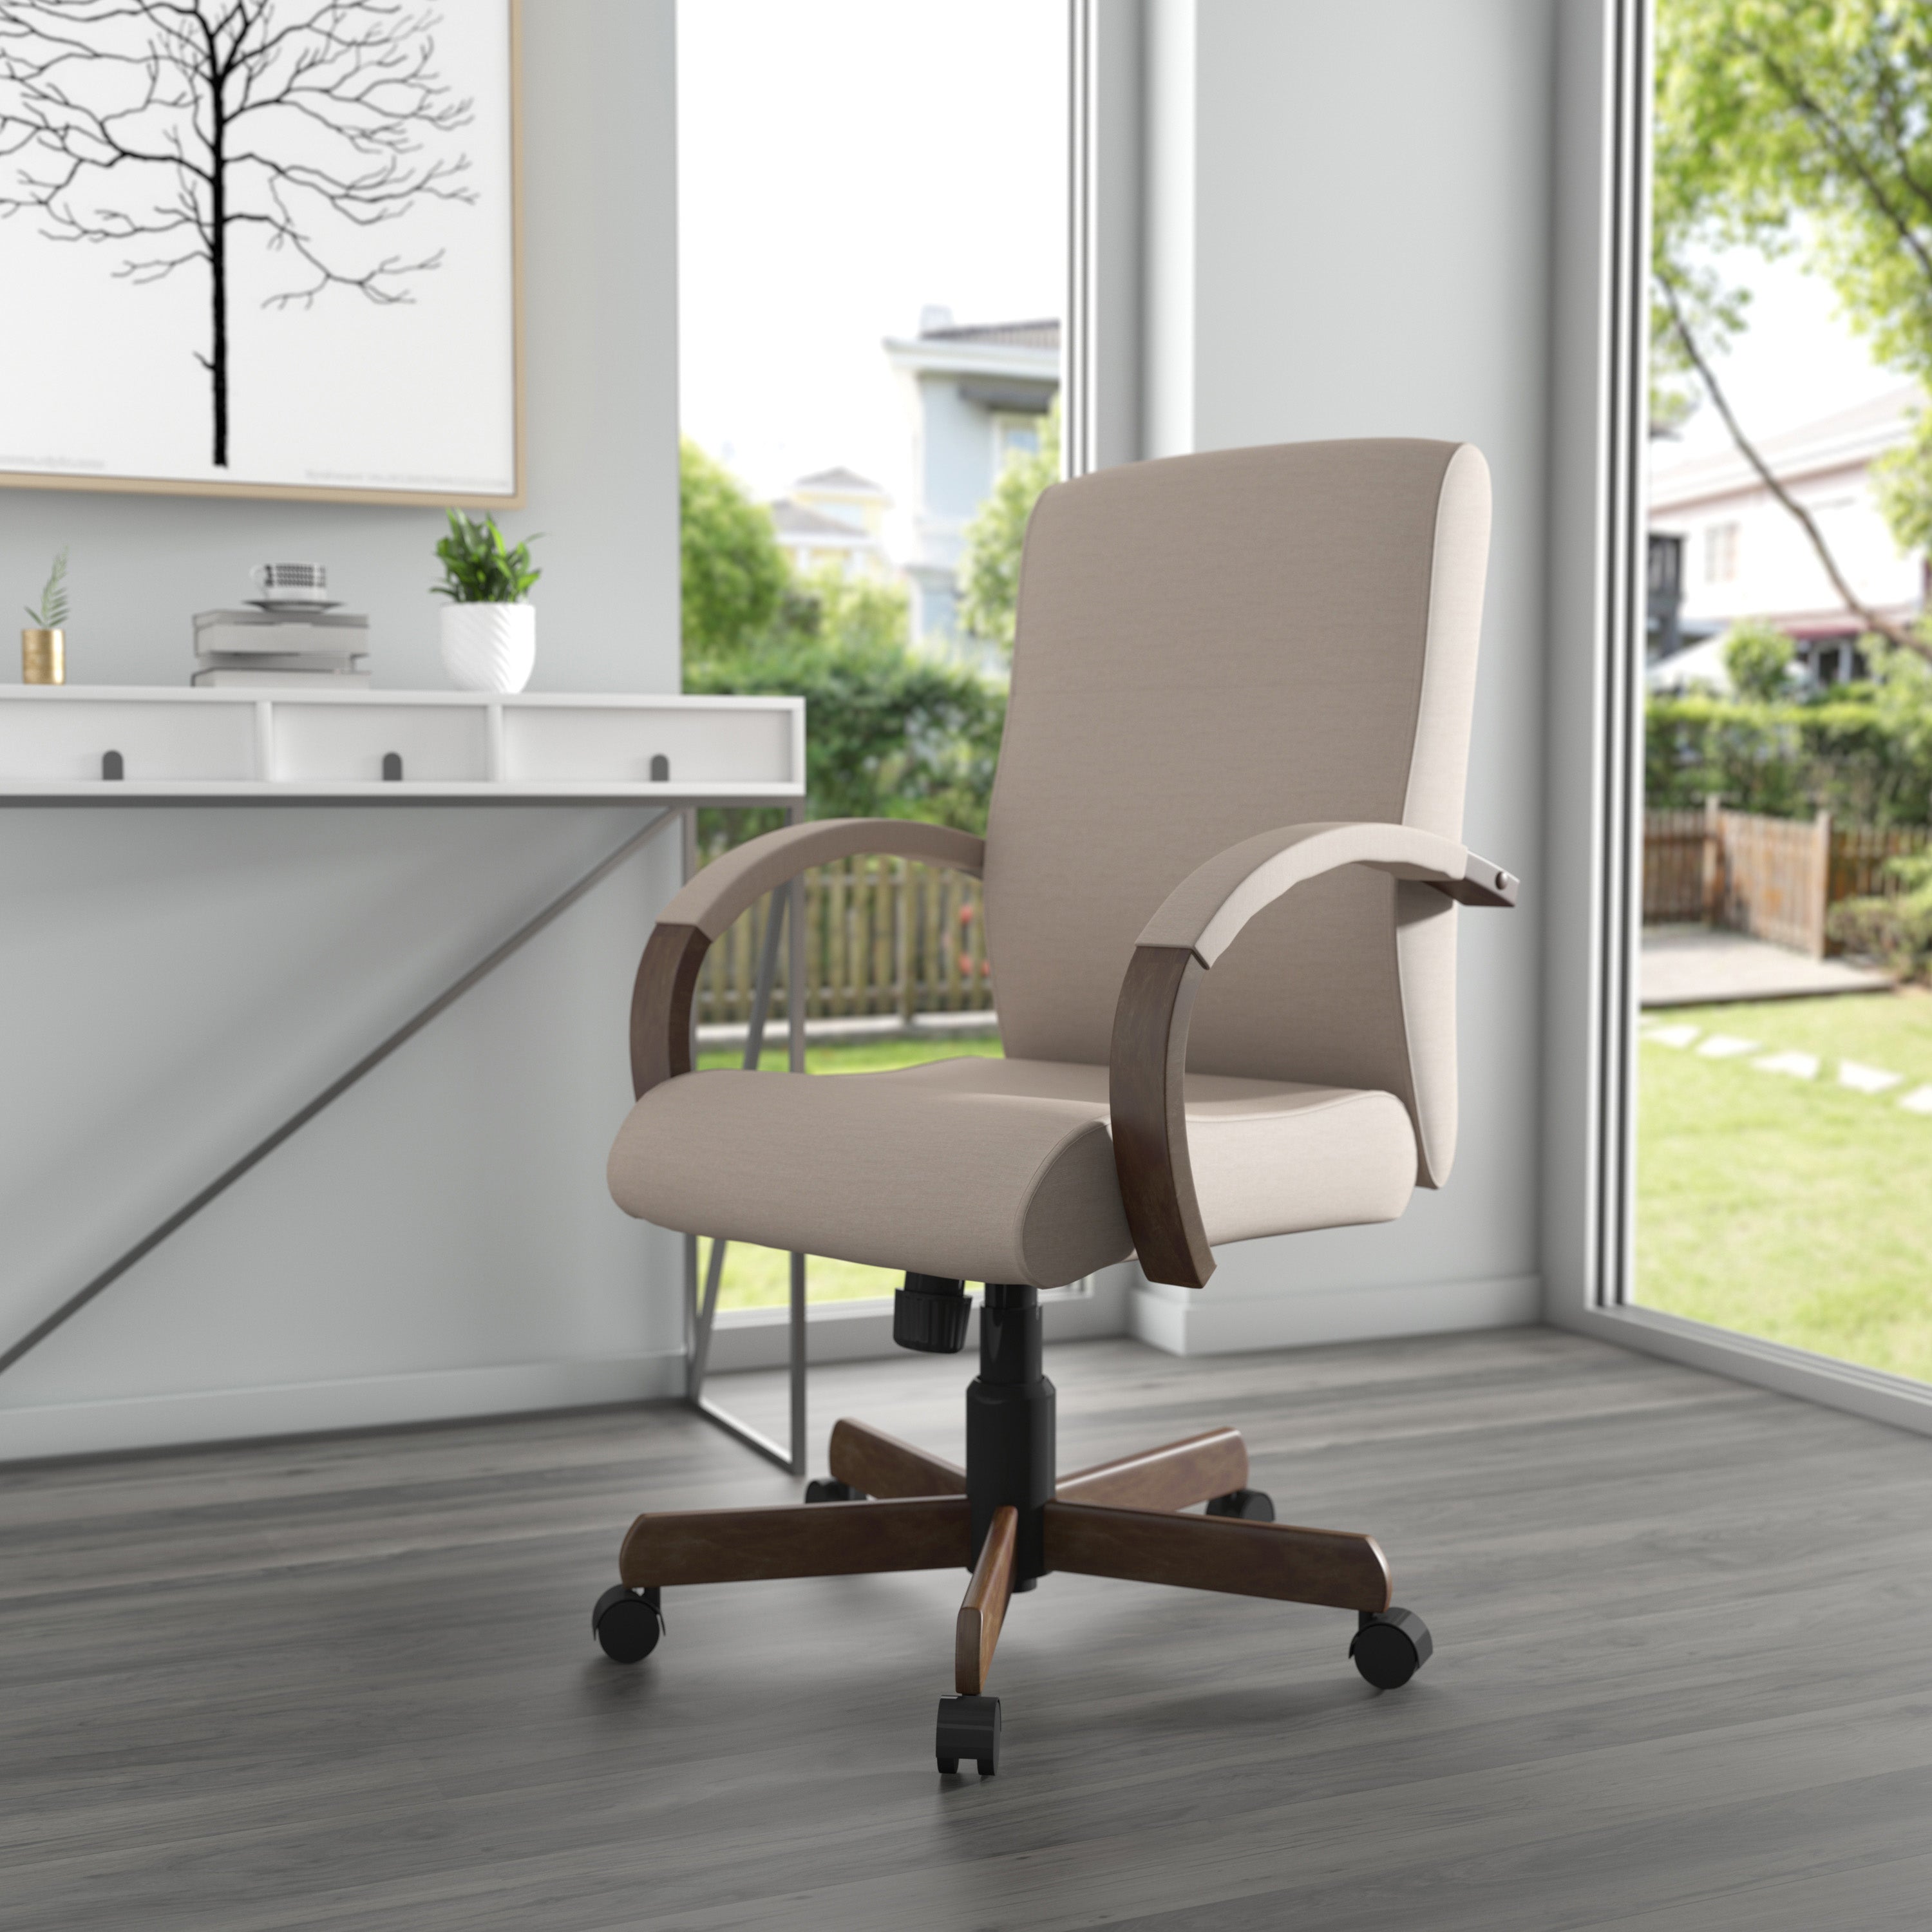 Modern Executive Conference Chair - Beige with Driftwood, B696DW-BG